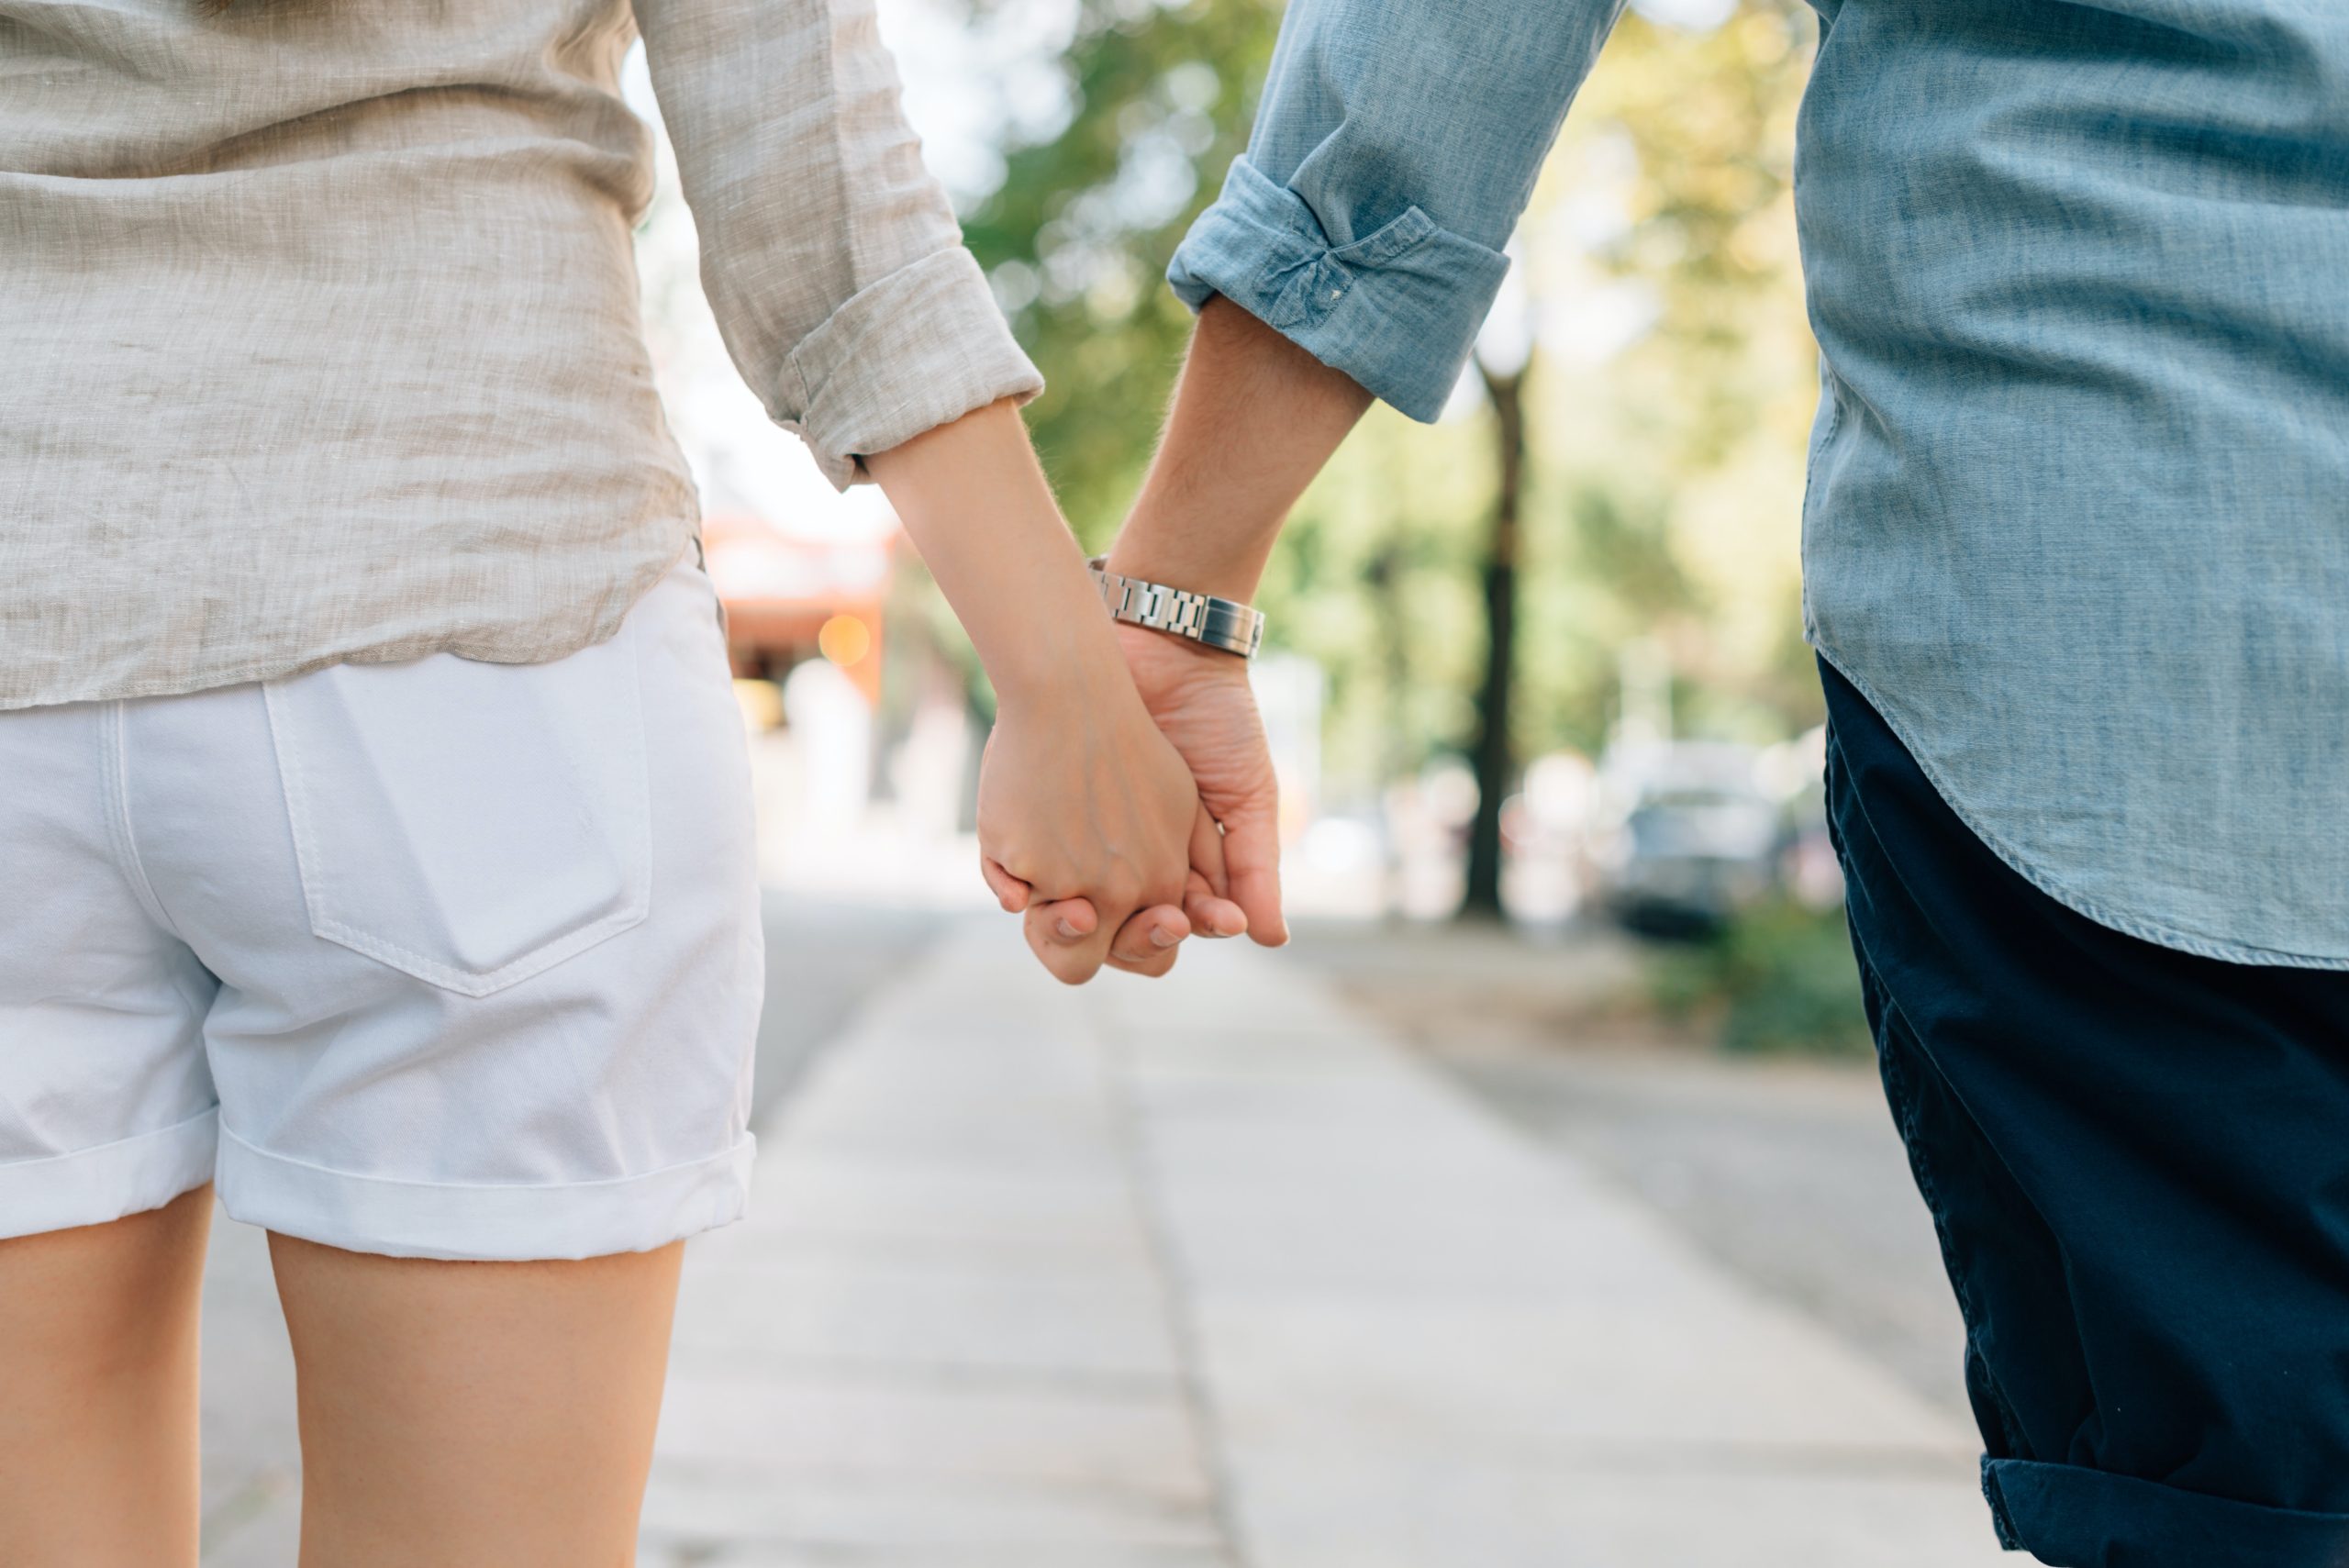 A man and woman hold hands.